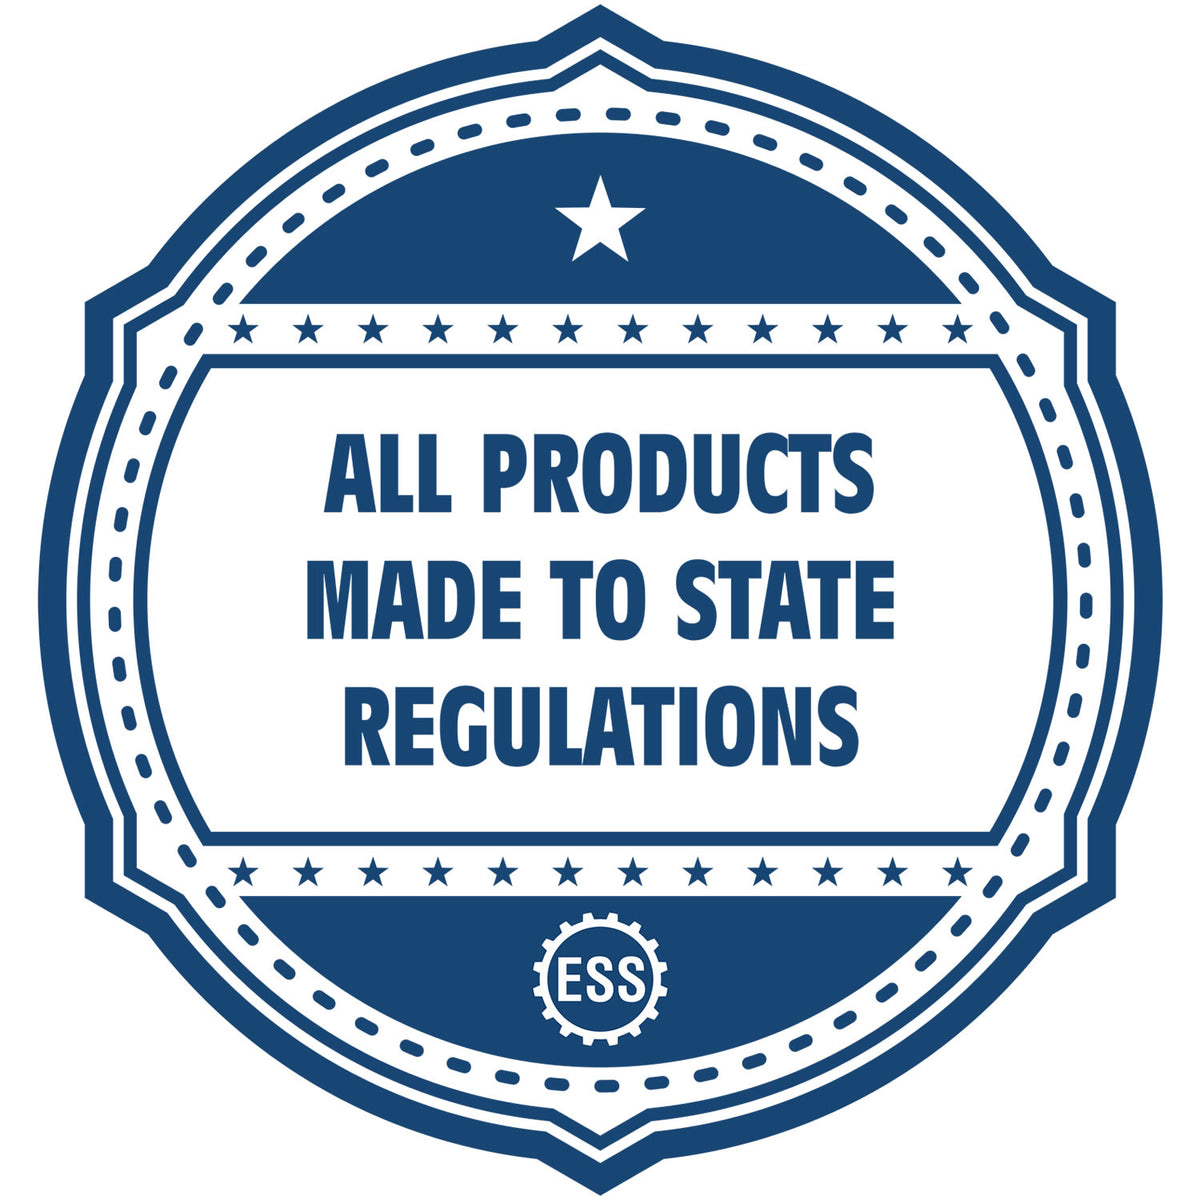 An icon or badge element for the PSI Rhode Island Notary Stamp showing that this product is made in compliance with state regulations.